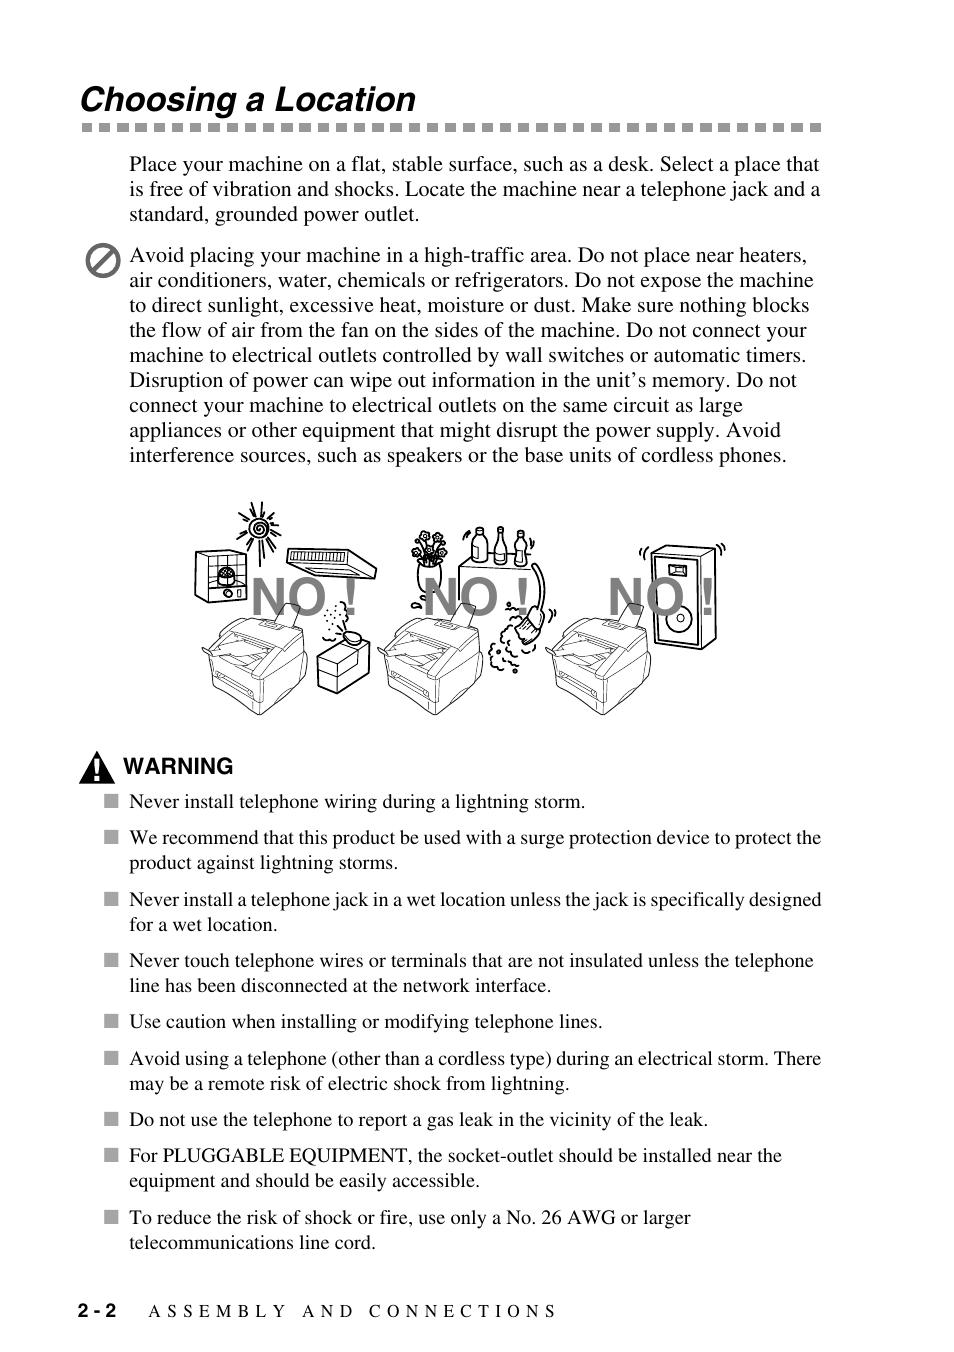 Choosing a location, Choosing a location -2 | Brother IntelliFAX 4100e User Manual | Page 28 / 156